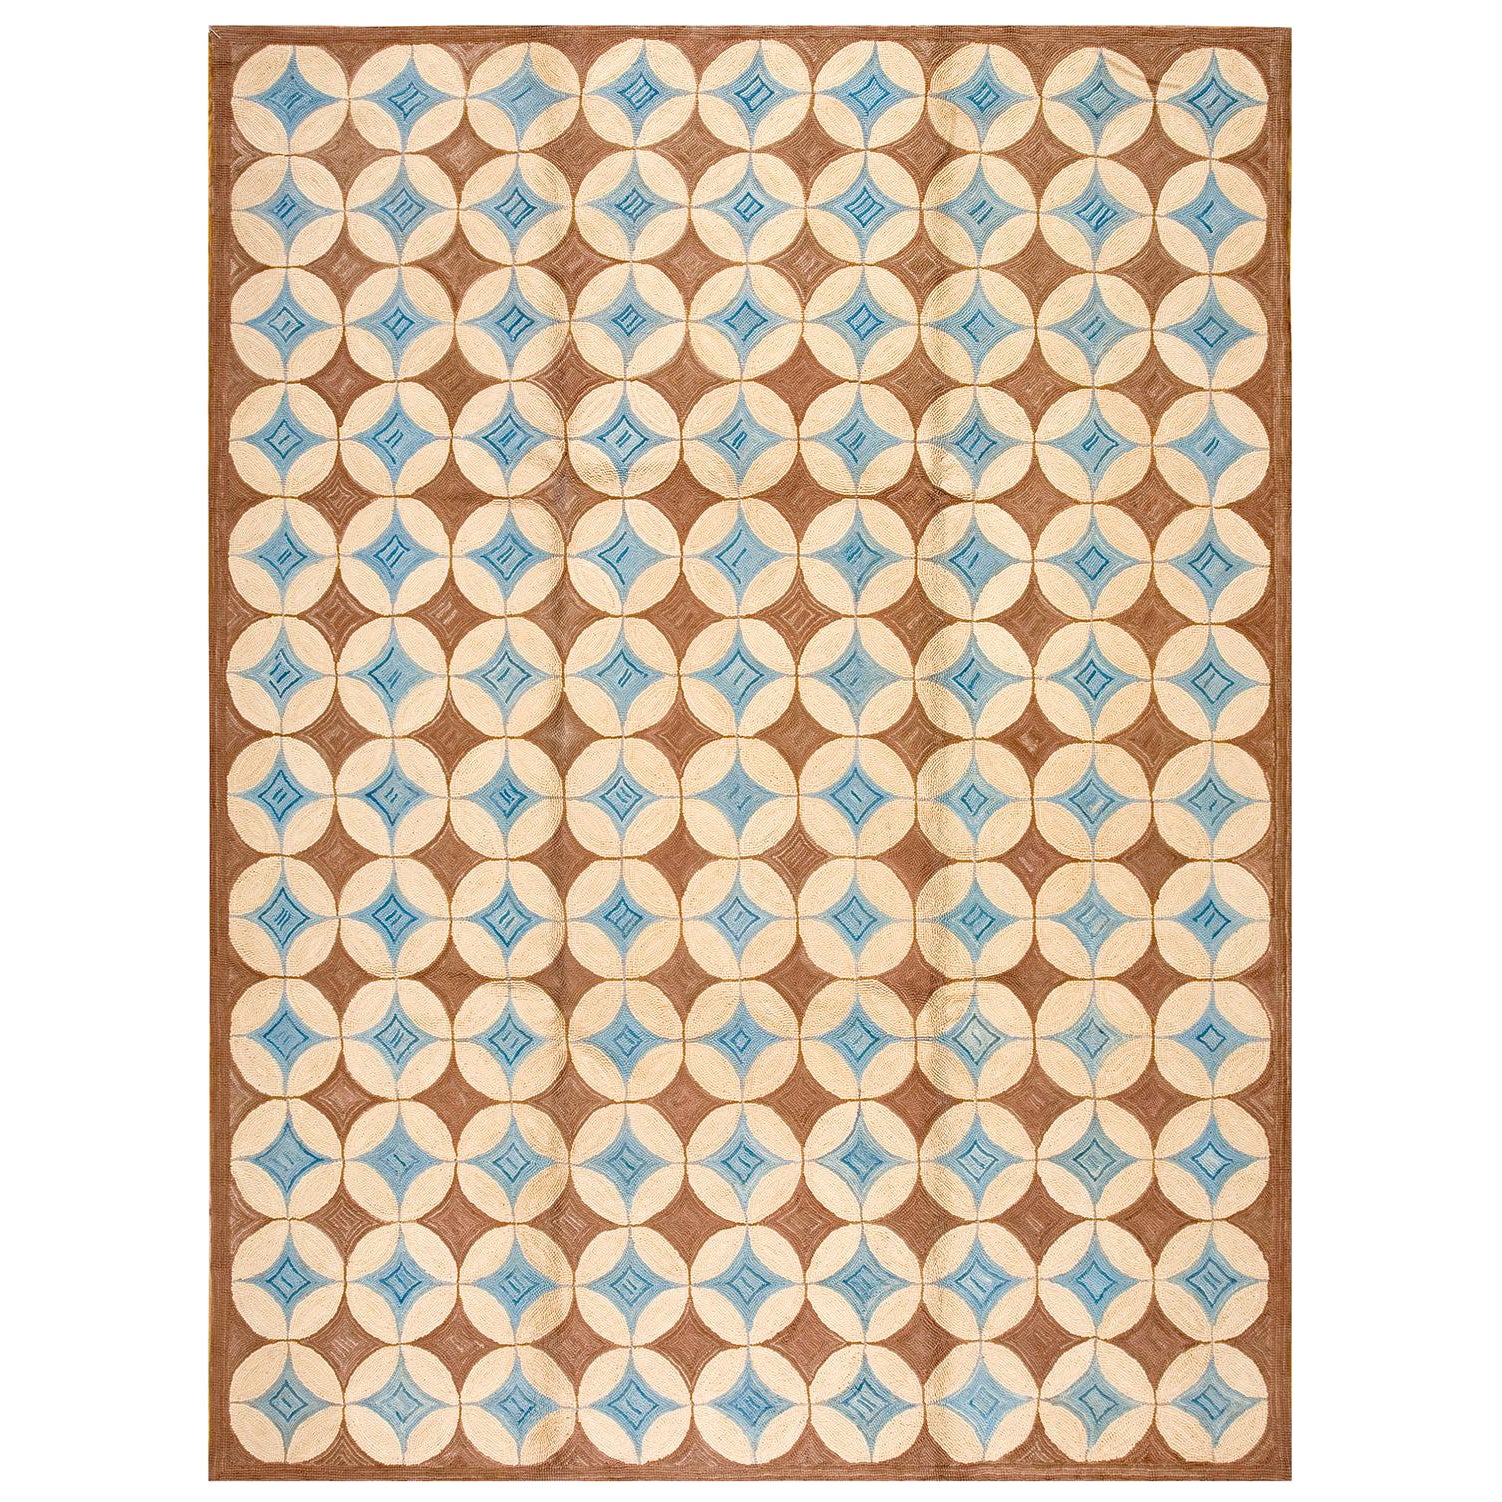 Contemporary  Hooked Rug (10' x 14' - 305 x 427 )